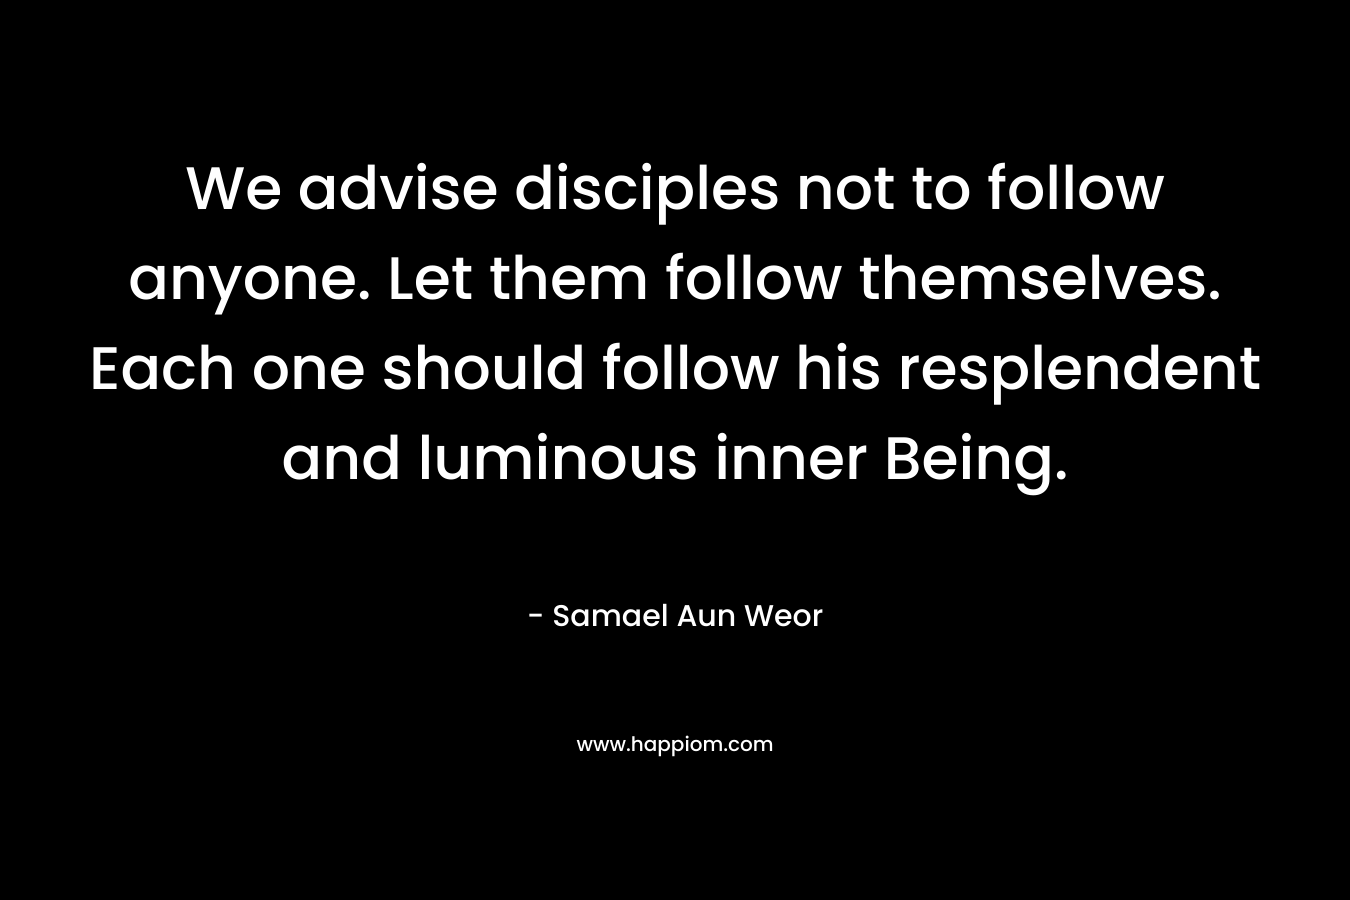 We advise disciples not to follow anyone. Let them follow themselves. Each one should follow his resplendent and luminous inner Being.